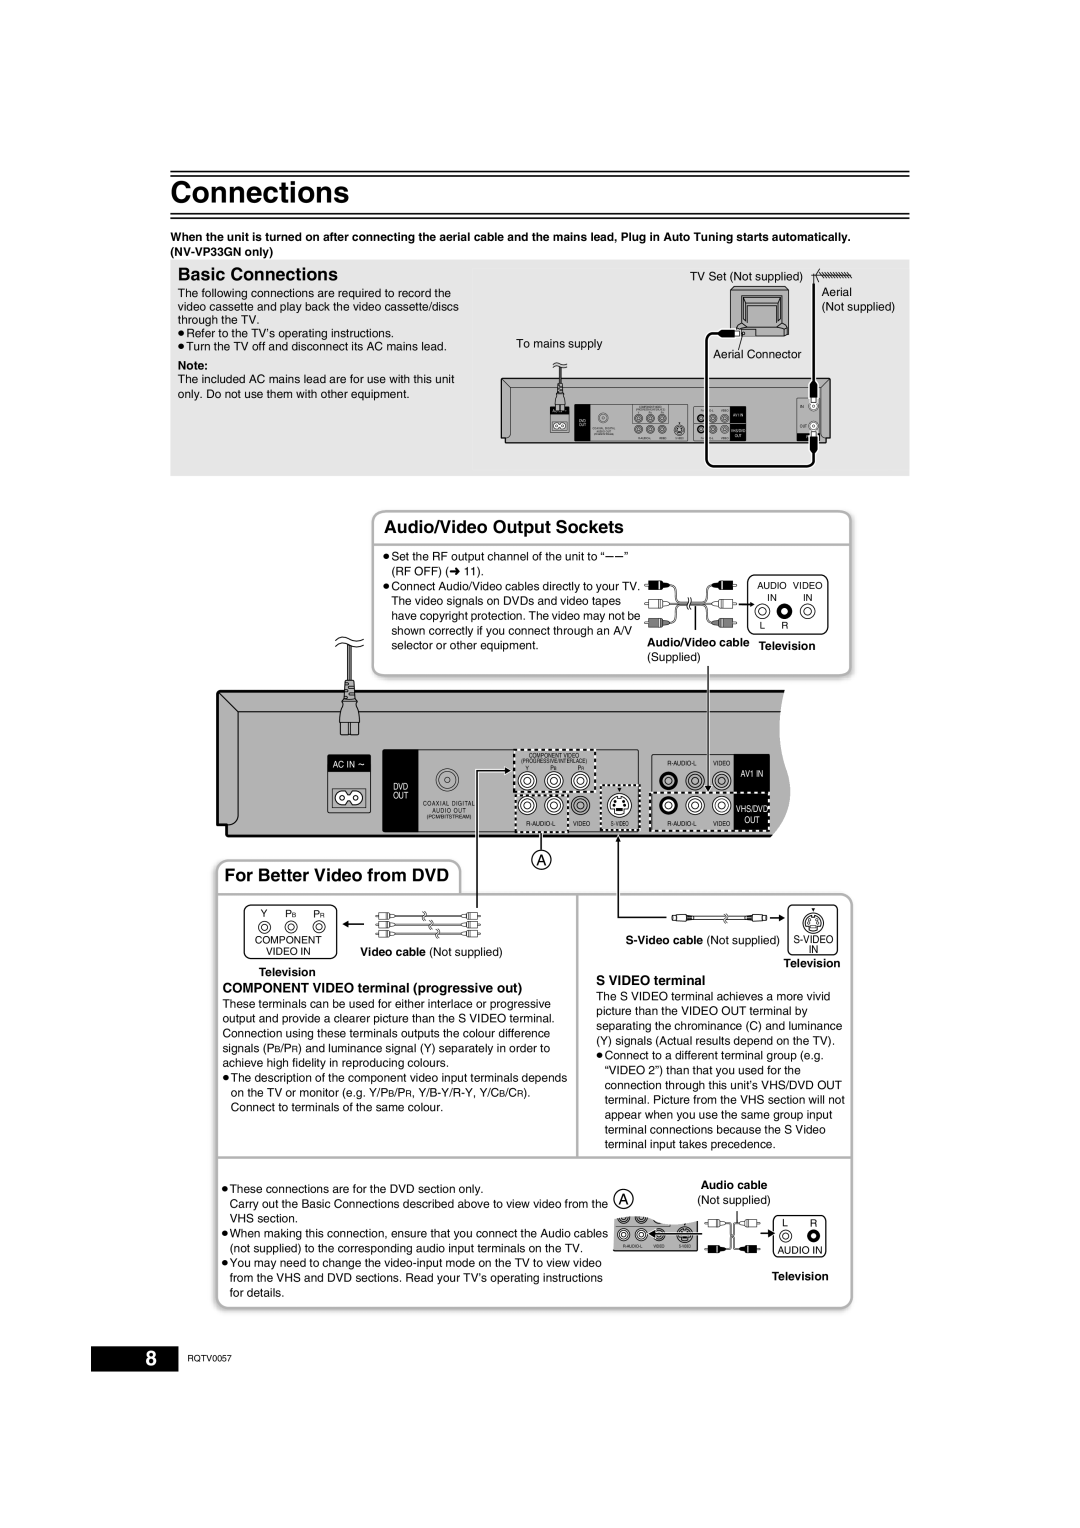 Panasonic NV-VP33 Series Basic Connections, Audio/Video Output Sockets, For Better Video from DVD, S VIDEO terminal 